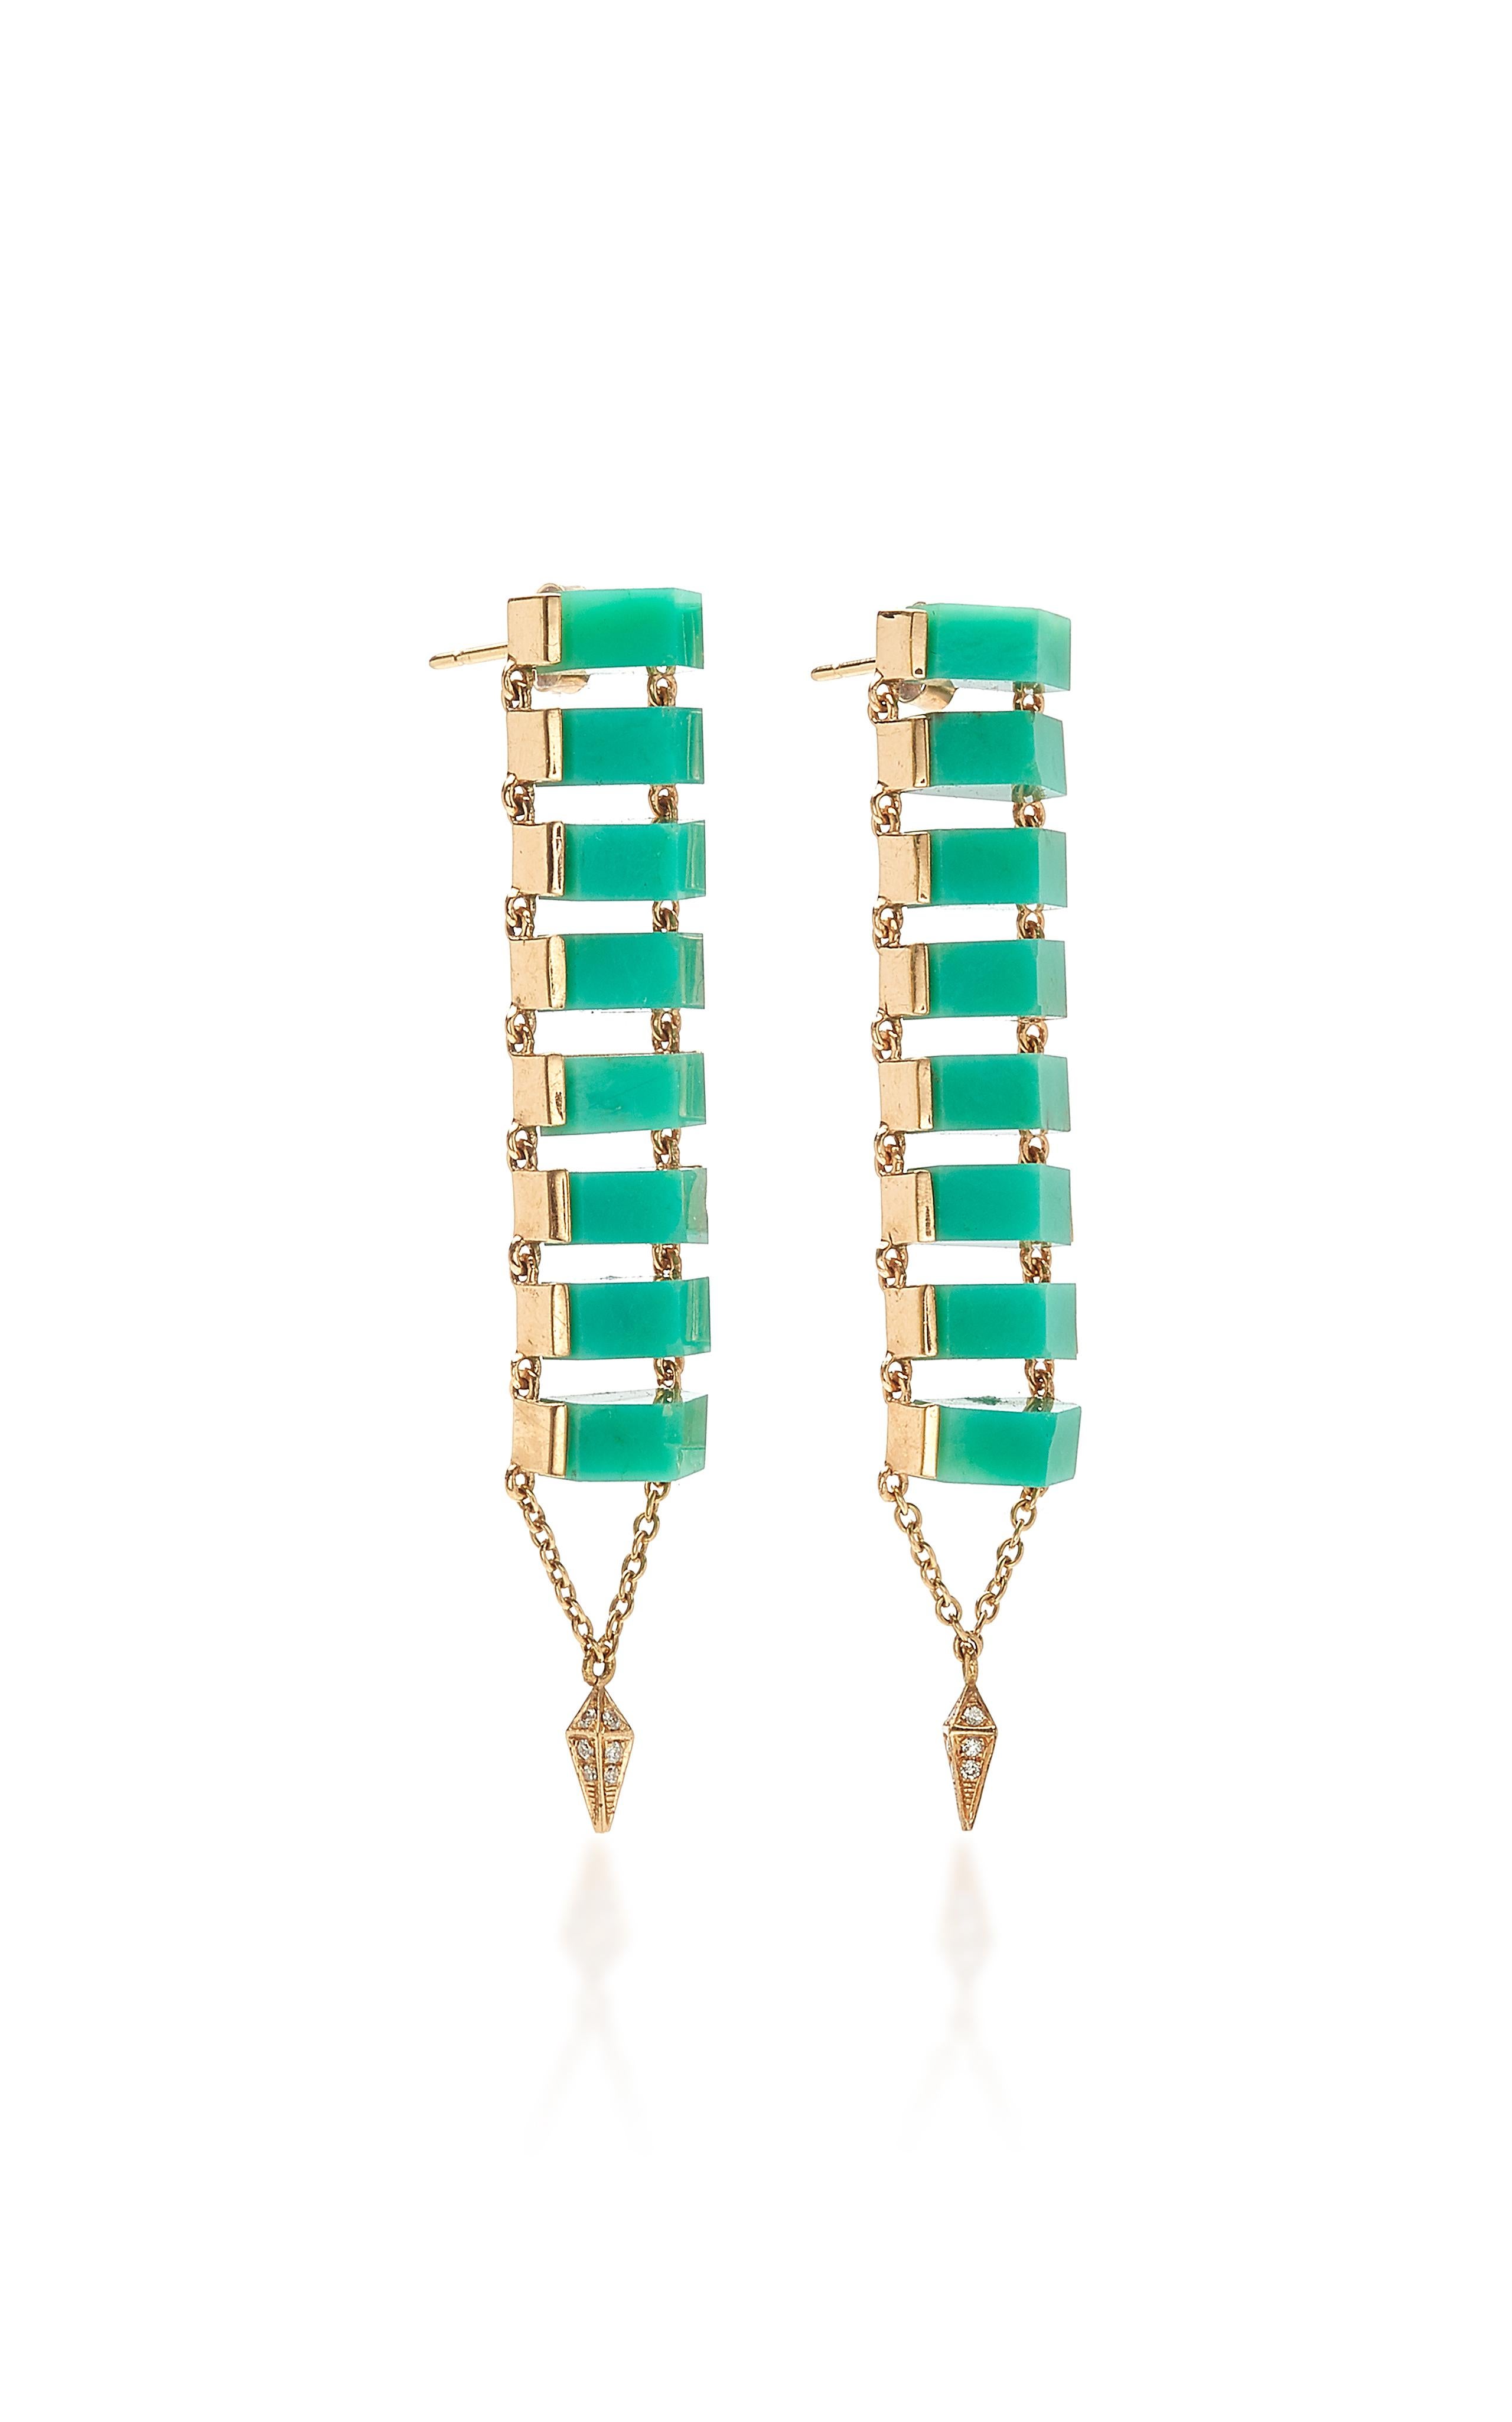 Chrysoprase and Diamond Ladder Earrings feature eight slices of Chrysoprase on each earring set downward in a linear pattern in Rose Gold and finished with Rose Gold chain and White Diamond Pyramid Tips.

18k Rose Gold : 24.4g
Chrysoprase
White